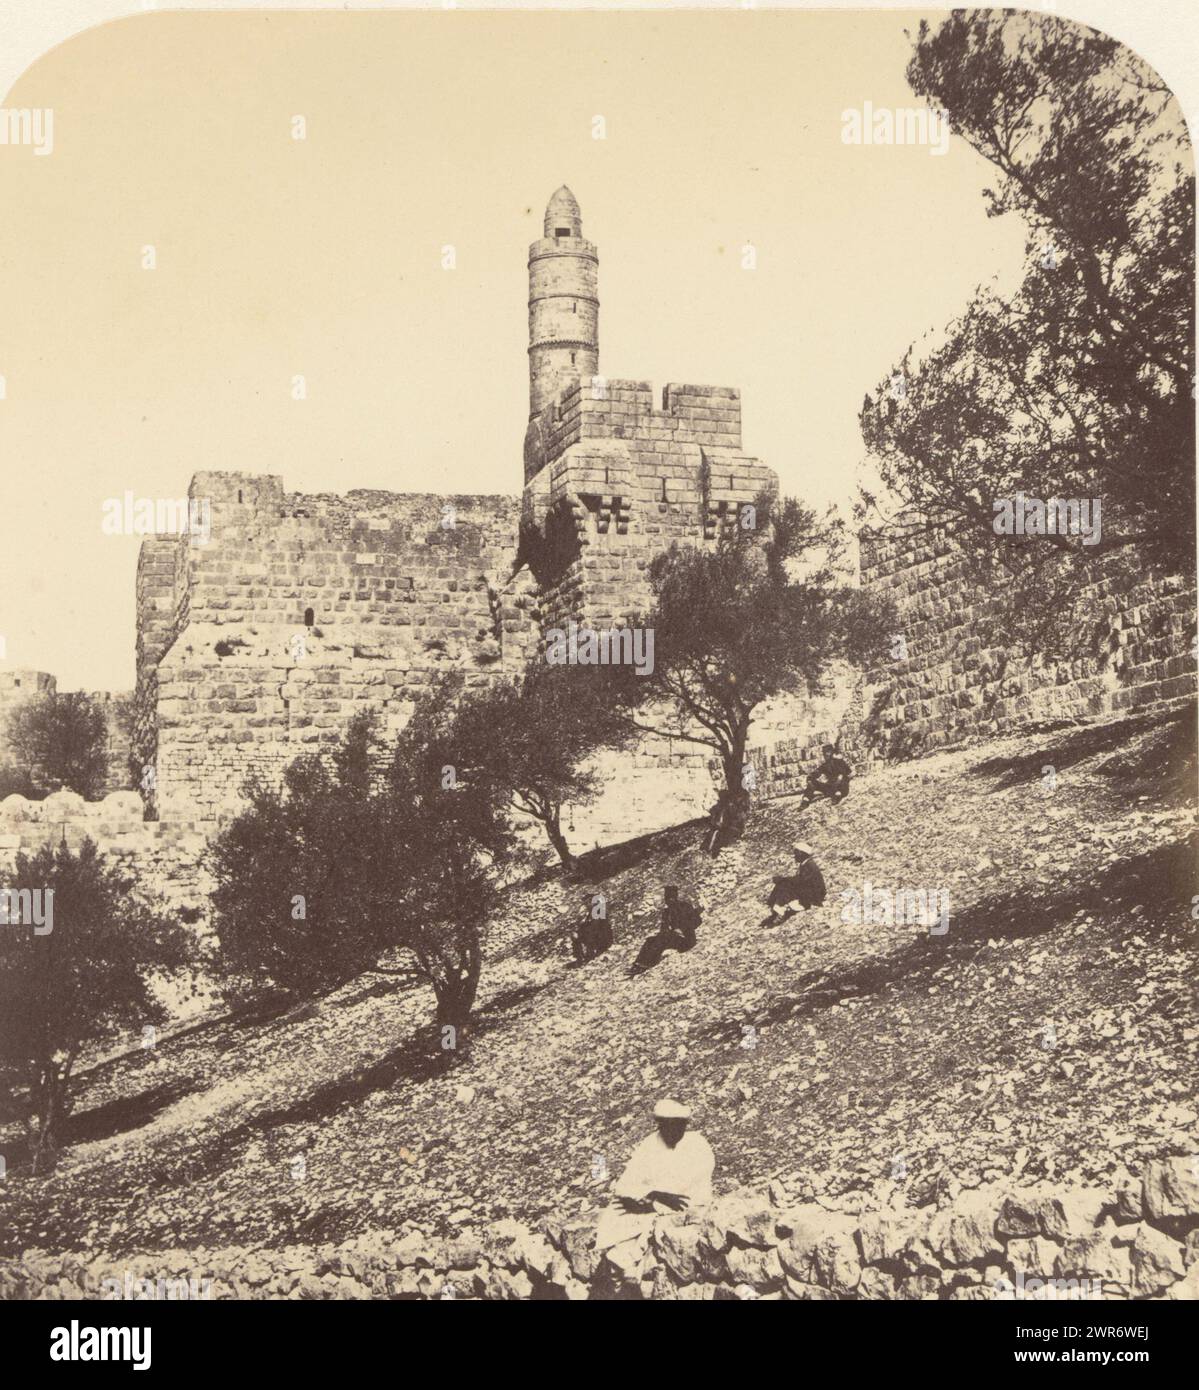 View of the Tower of David in Jerusalem, From the S. W. outside the Wall of the City (title on object), Citadel (series title on object), James McDonald, Jeruzalem, c. 1860 - in or before 1865, paper, albumen print, height 523 mm × width 340 mm, photograph Stock Photo